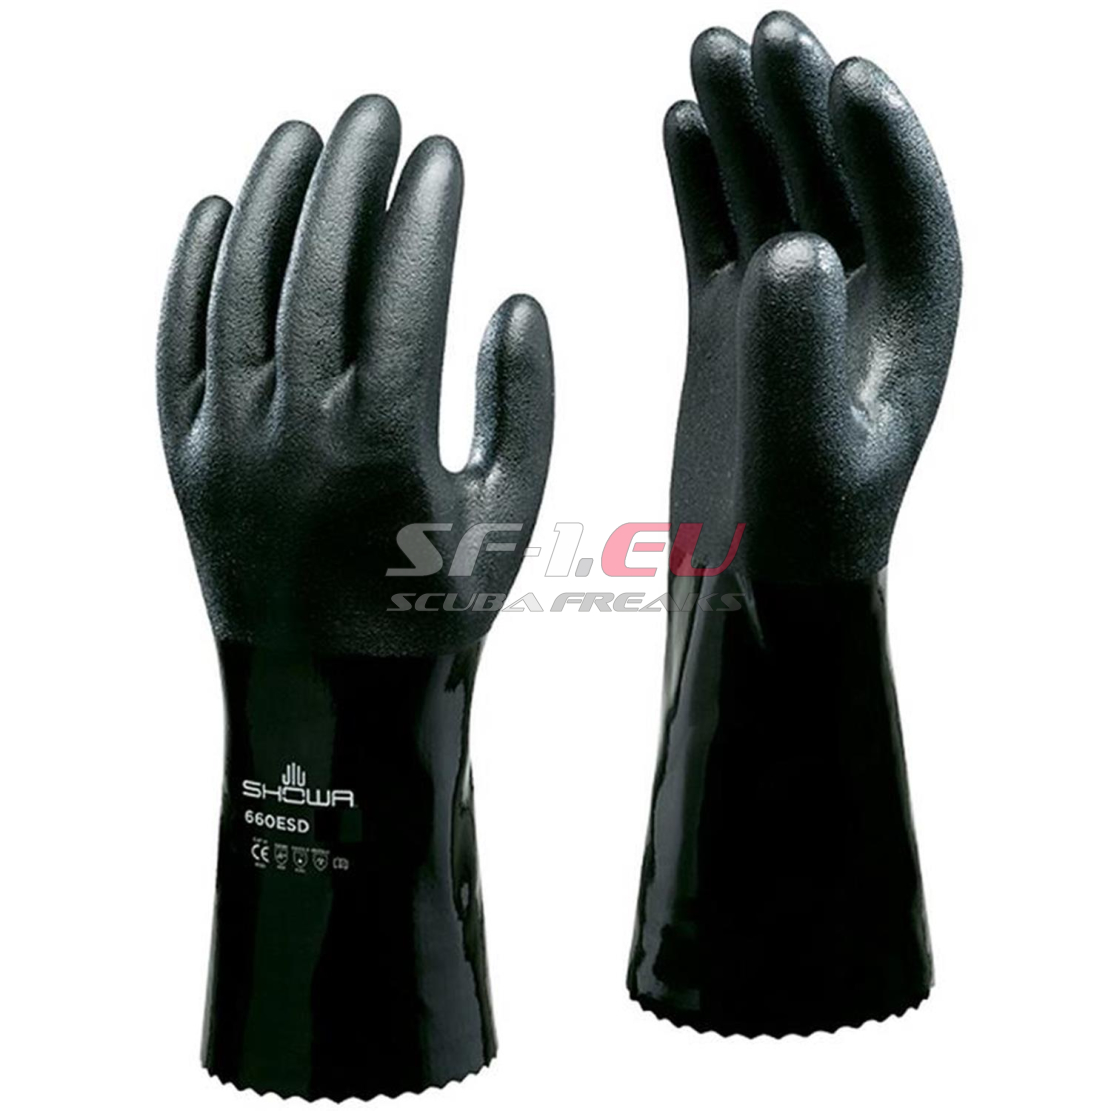 Si Tech Showa Dry Suit Glove Size Large New 